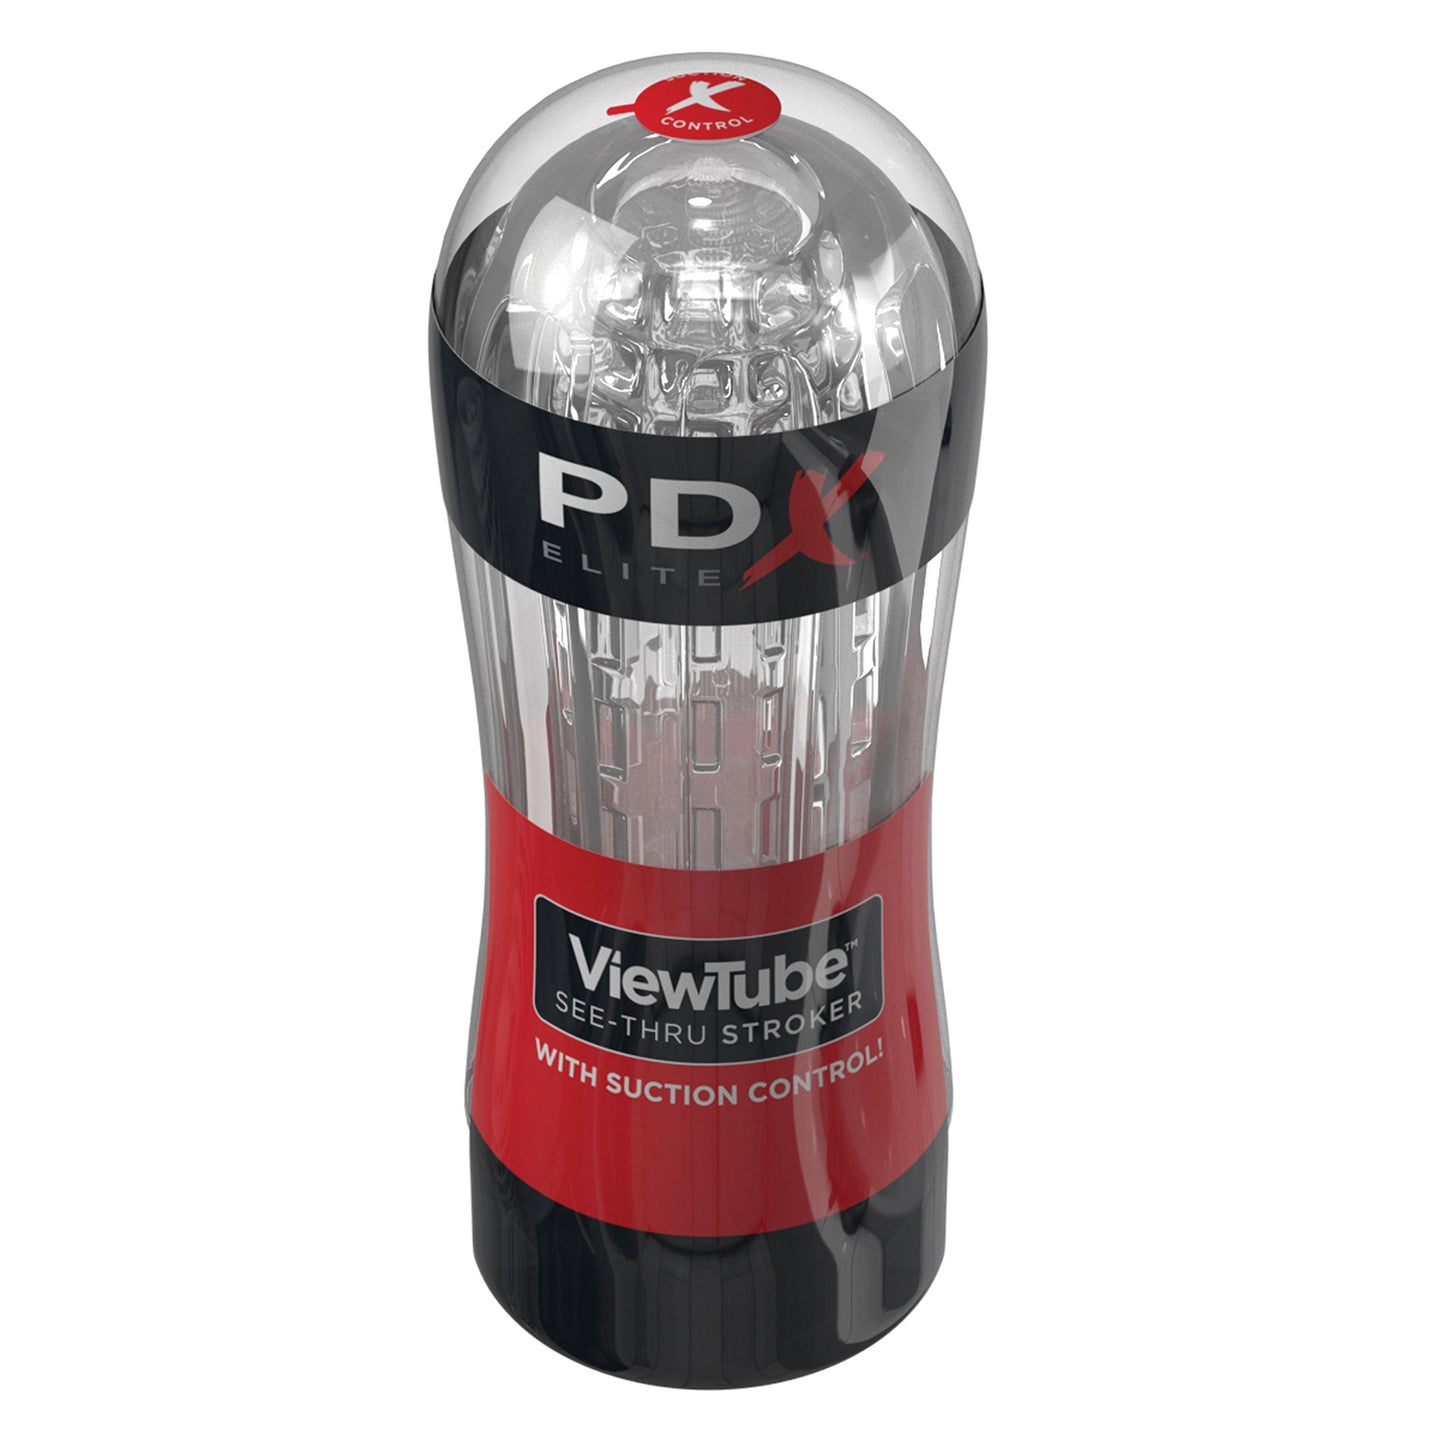 PDX Elite ViewTube Stroker - Clear - Thorn & Feather